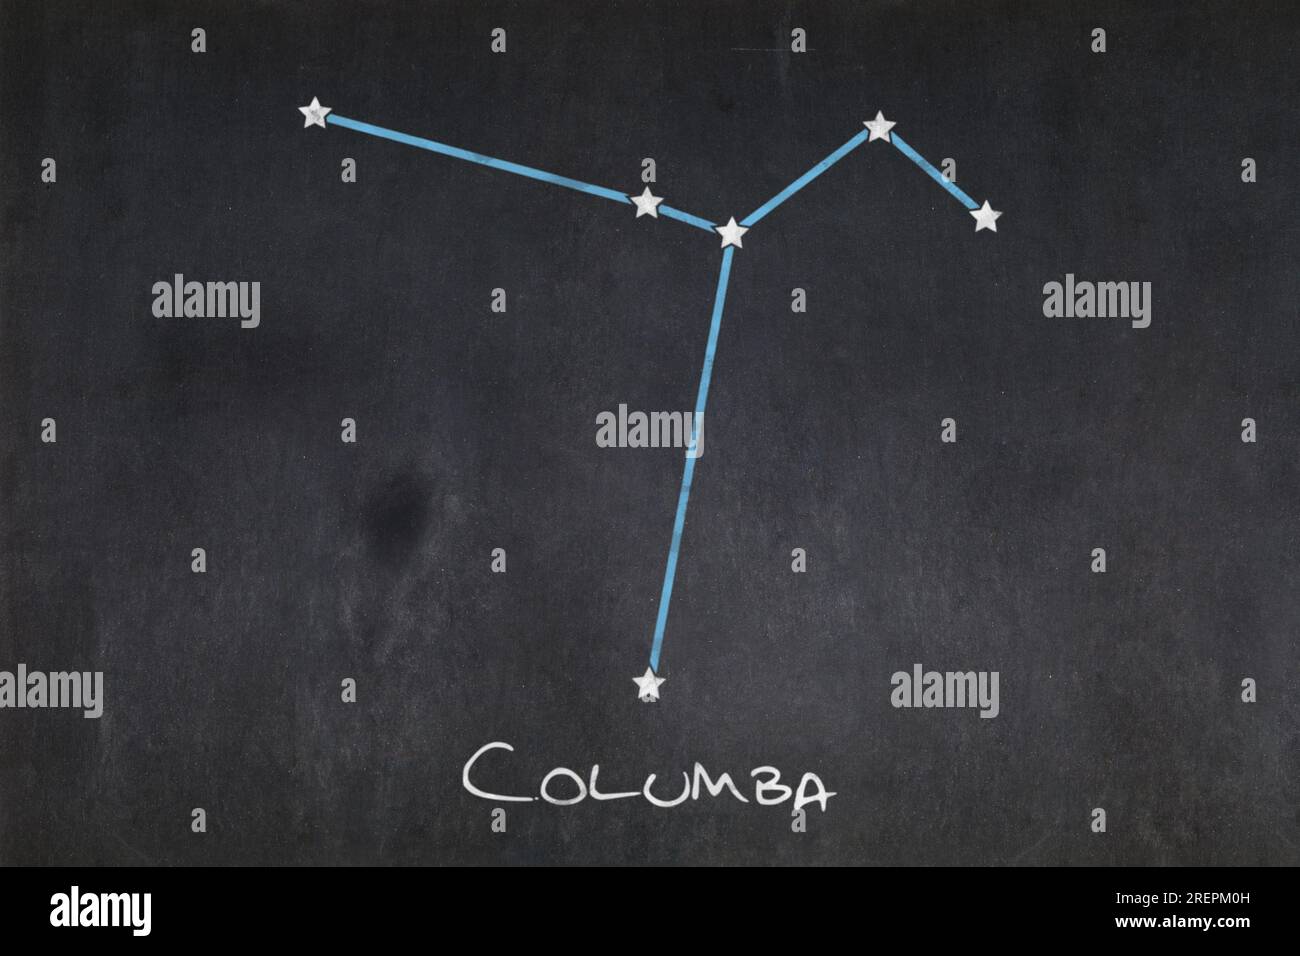 Blackboard with the Columba constellation drawn in the middle. Stock Photo